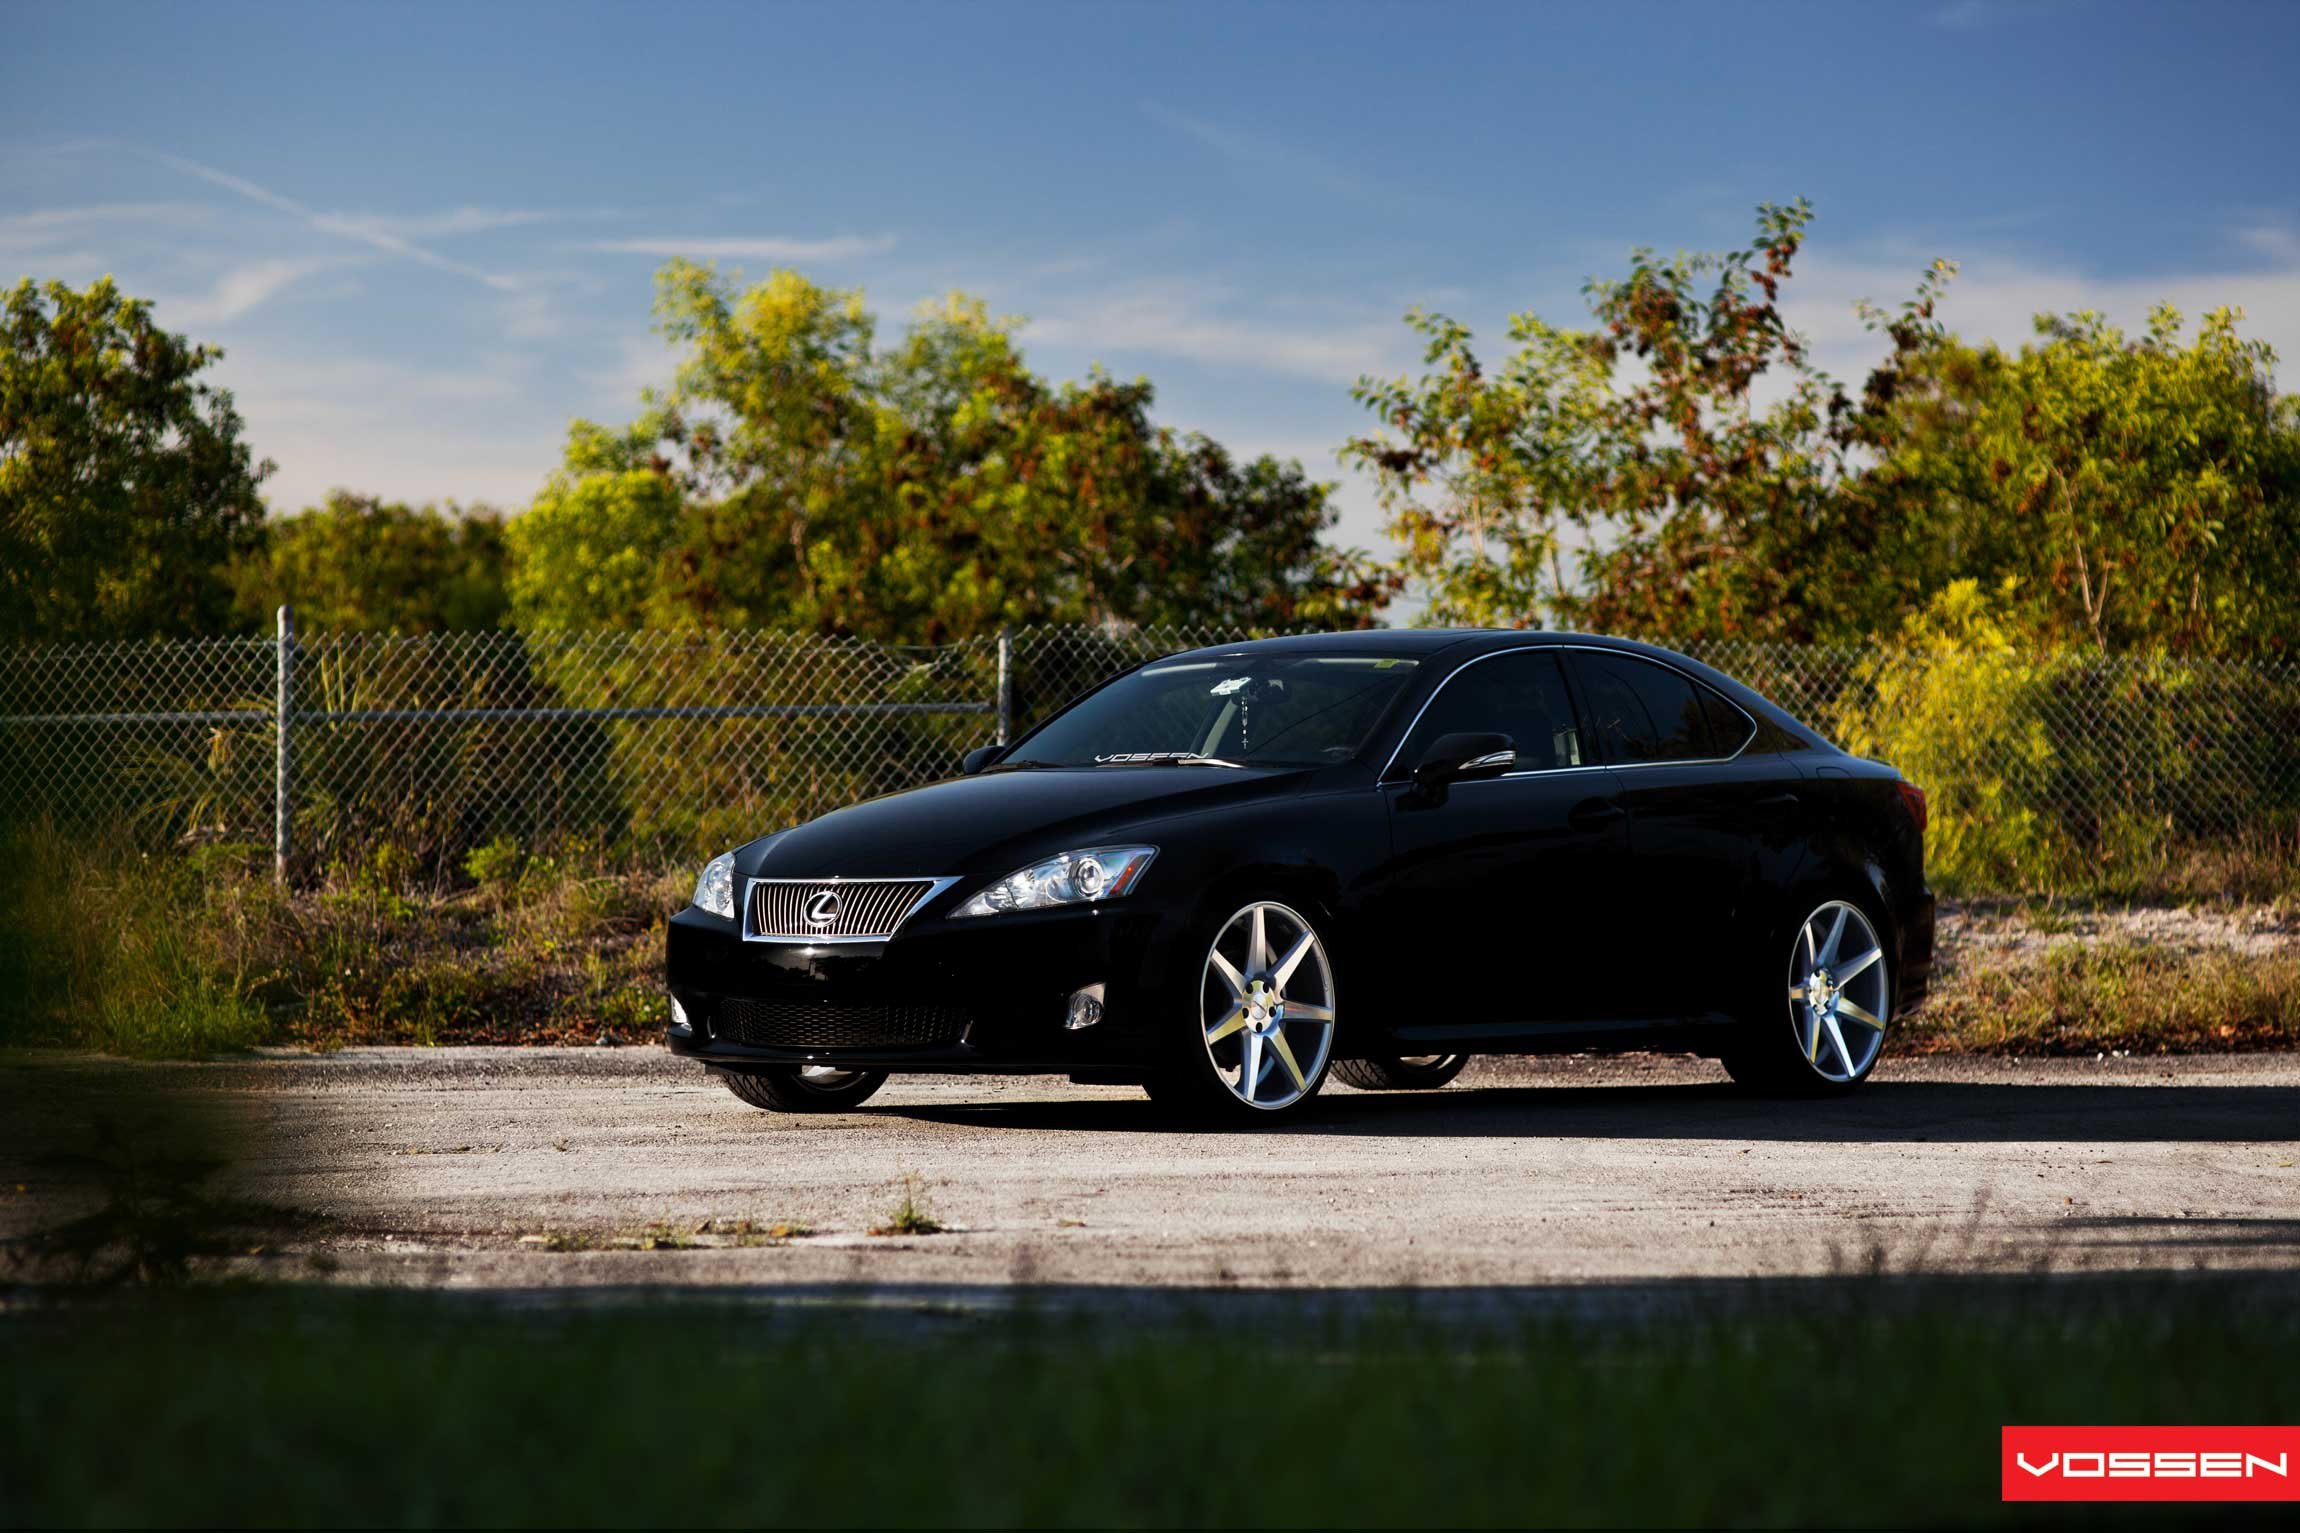 Black Lexus IS with Custom Chrome Grille - Photo by Vossen